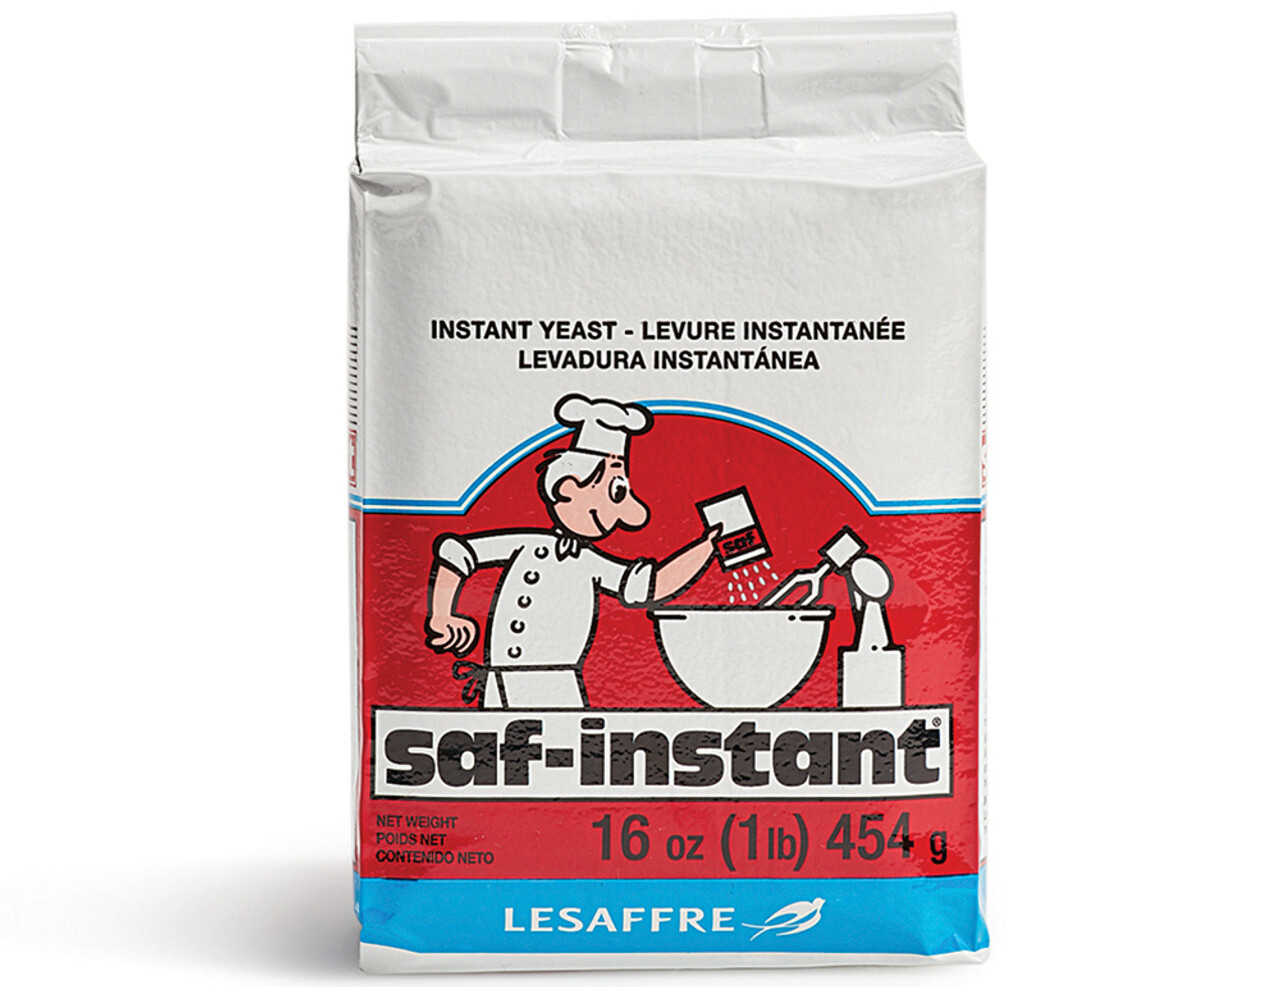 How To Store Saf Instant Yeast